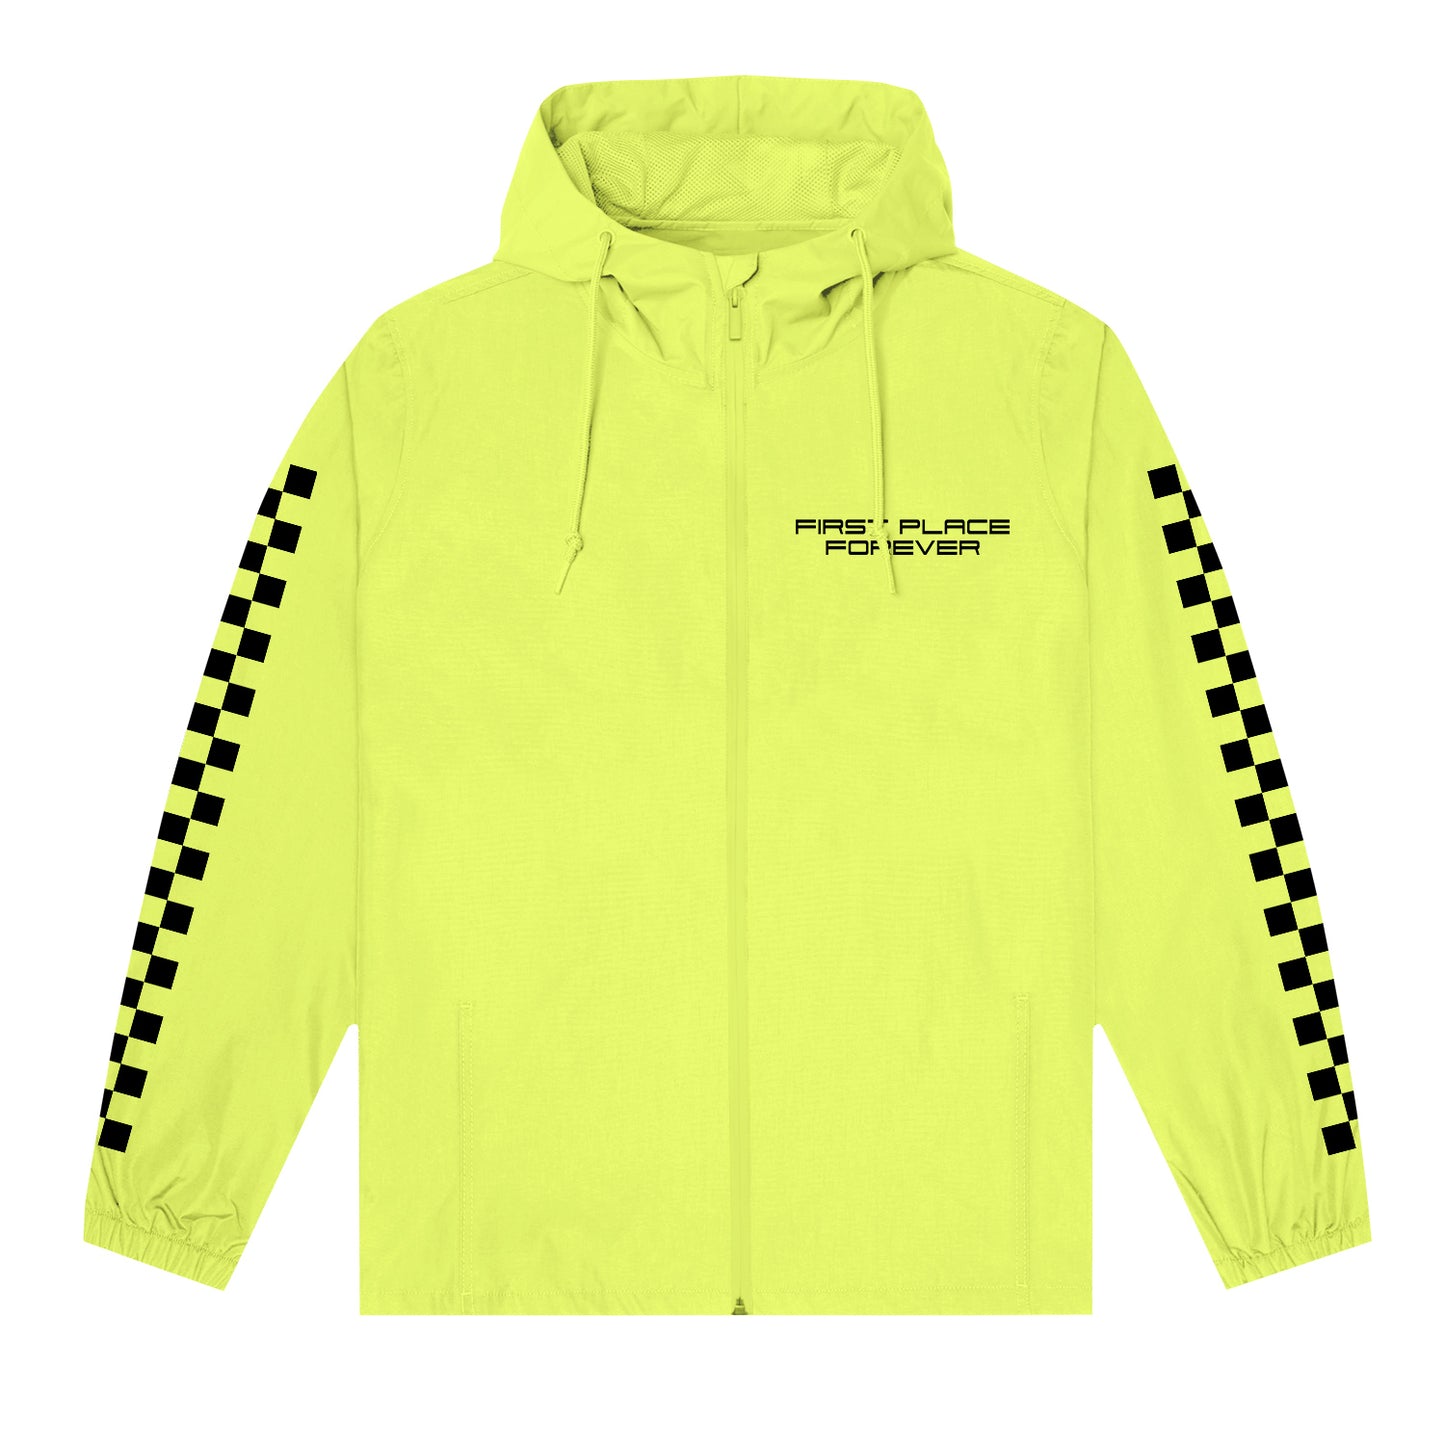 First Place Forever Safety Yellow Pullover Windbreaker